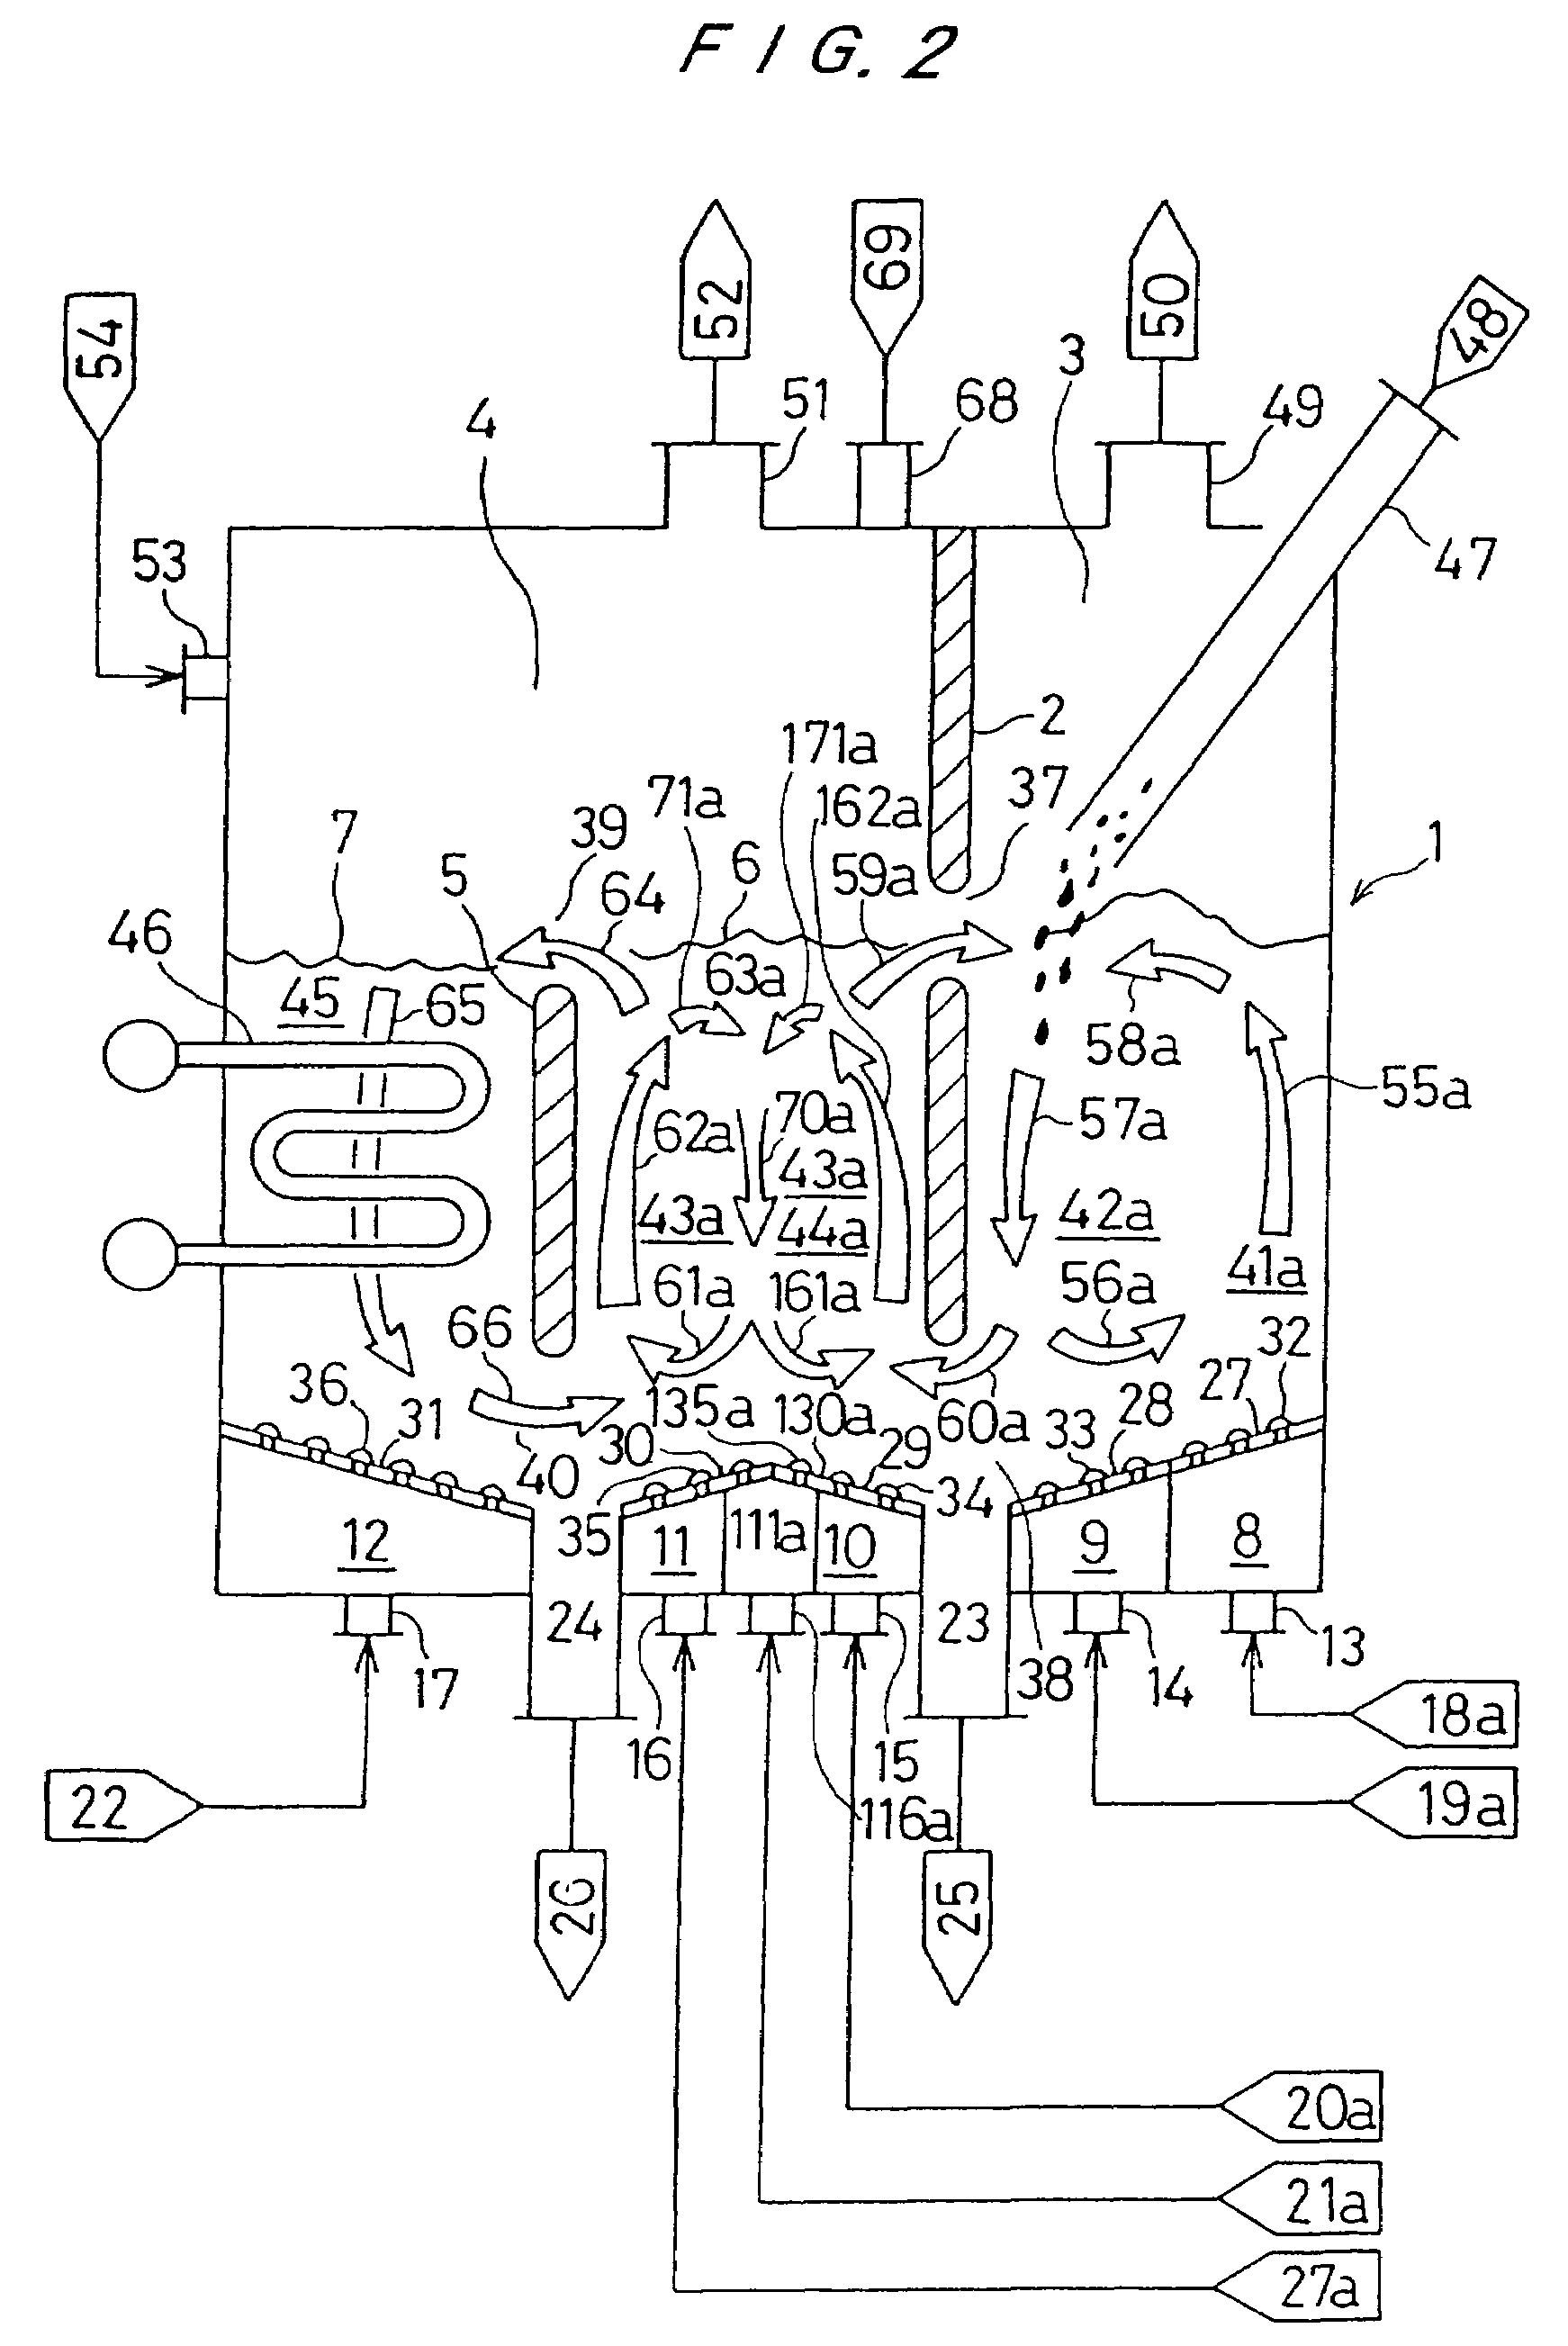 Fluidized-bed gasification and combustion furnace